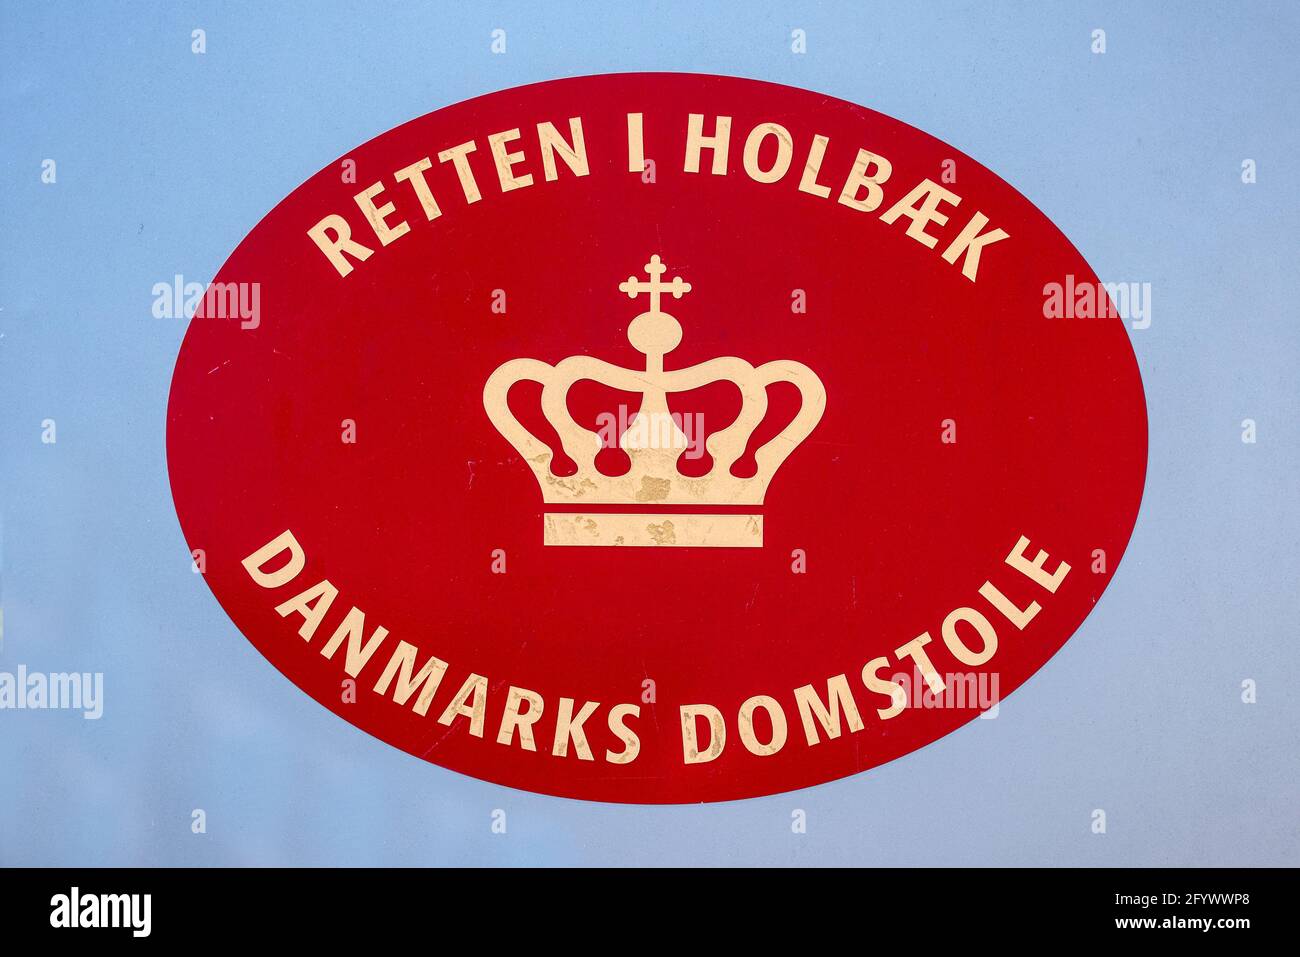 red logo of the Royal court in holbaek on a light blue background, Holbaek, Denmark, May 28, 2021 Stock Photo